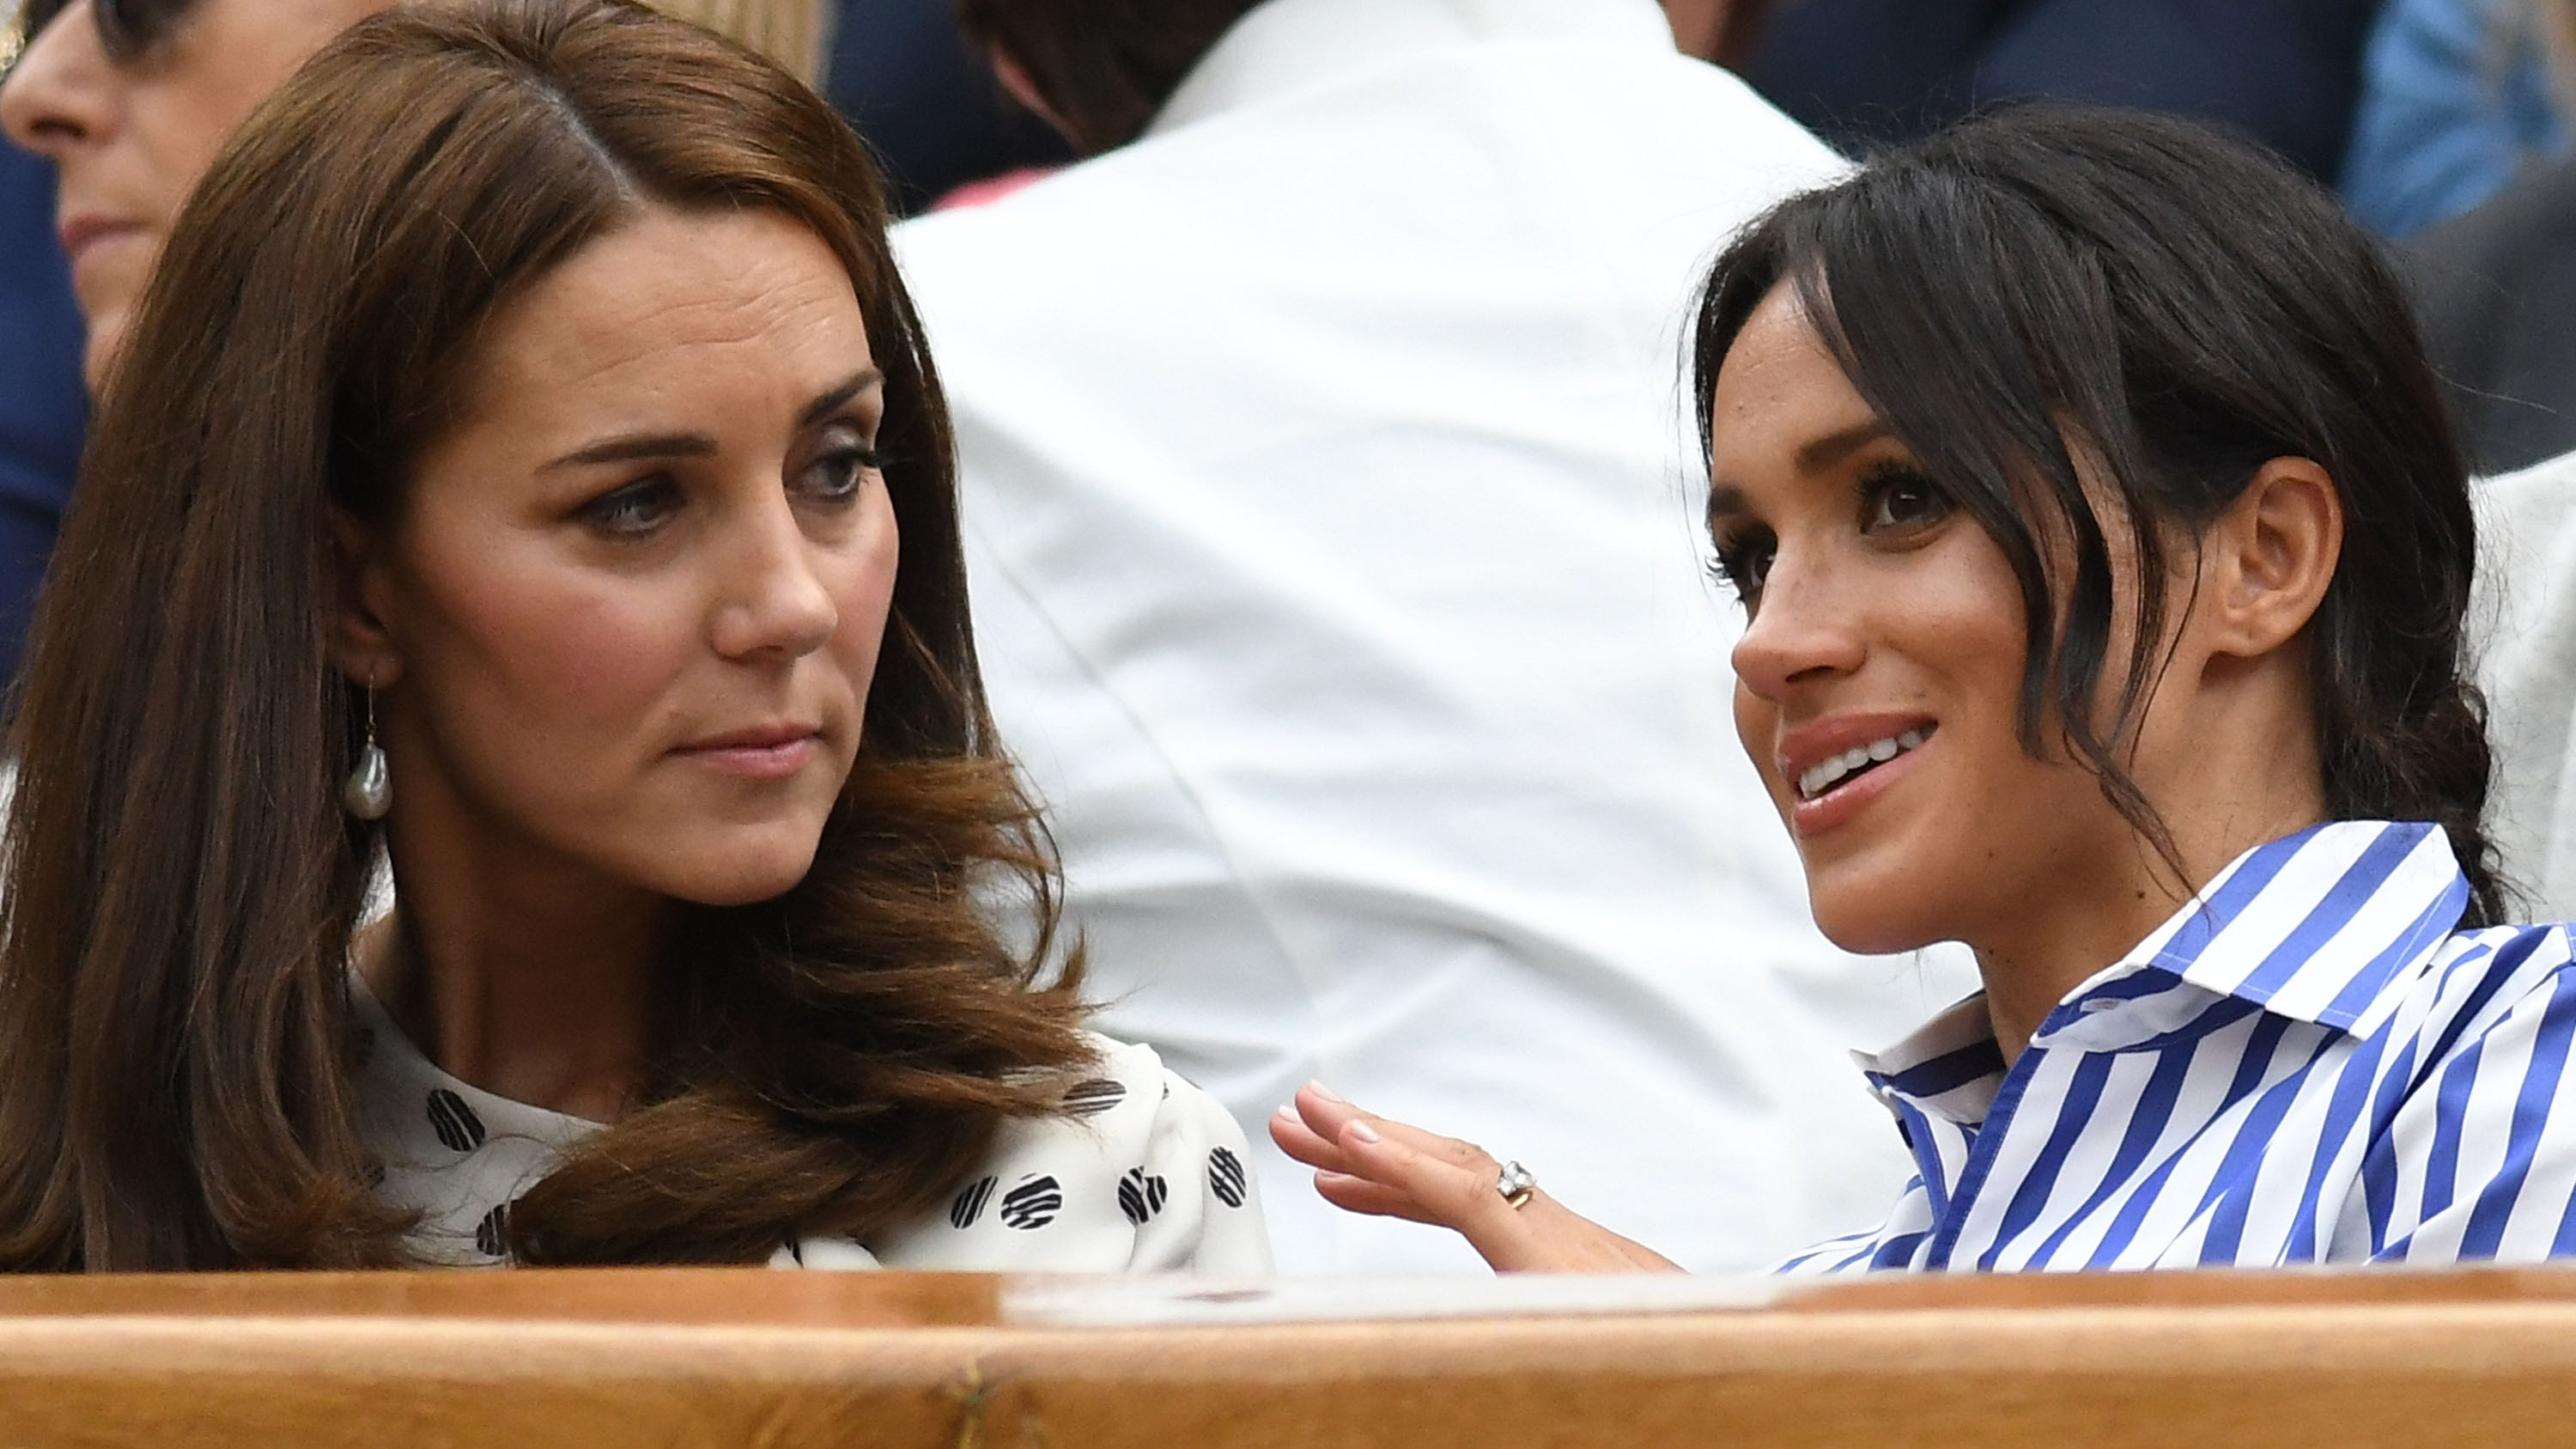 Kate Middleton Didn't Make Much Effort To Be Friends With Meghan Markle